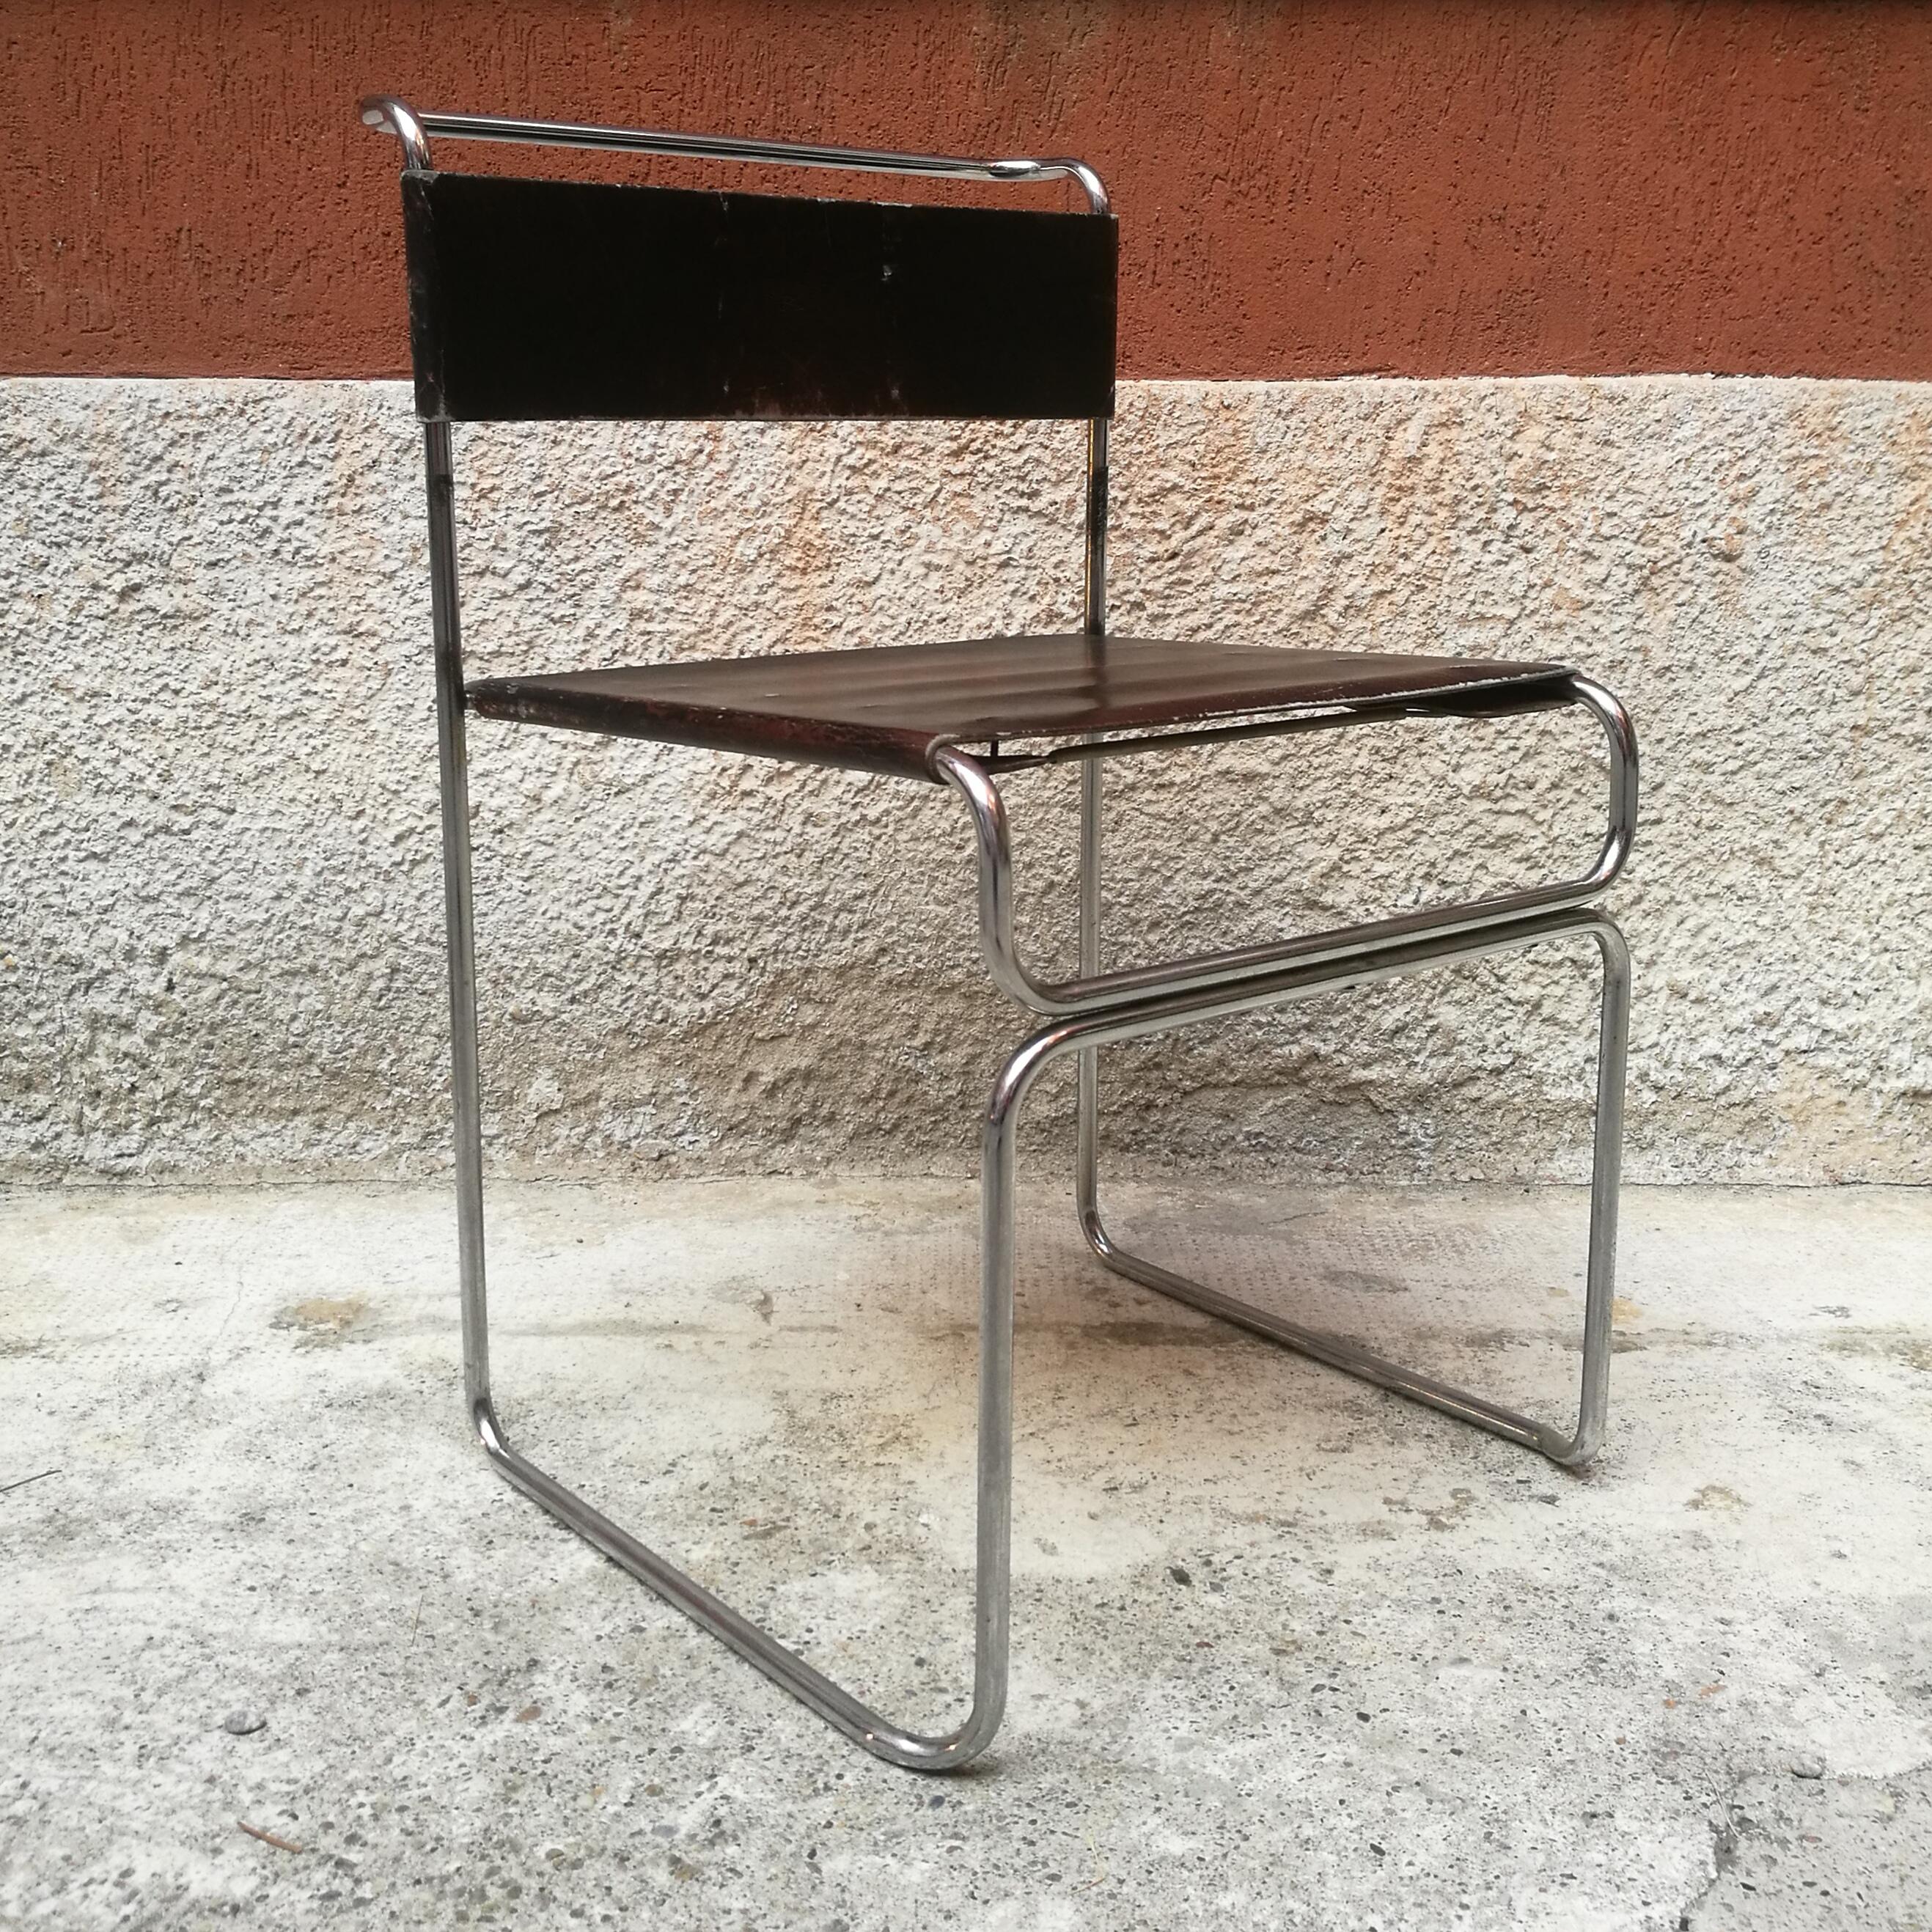 Six Libellula stackable chairs with a chromed steel structure and back leather seat
Design by Giuseppe Carini produced by Planula, 1970
Vintage condition, they have beautiful vintage leather
Stylish in a dining room and comfortable in every